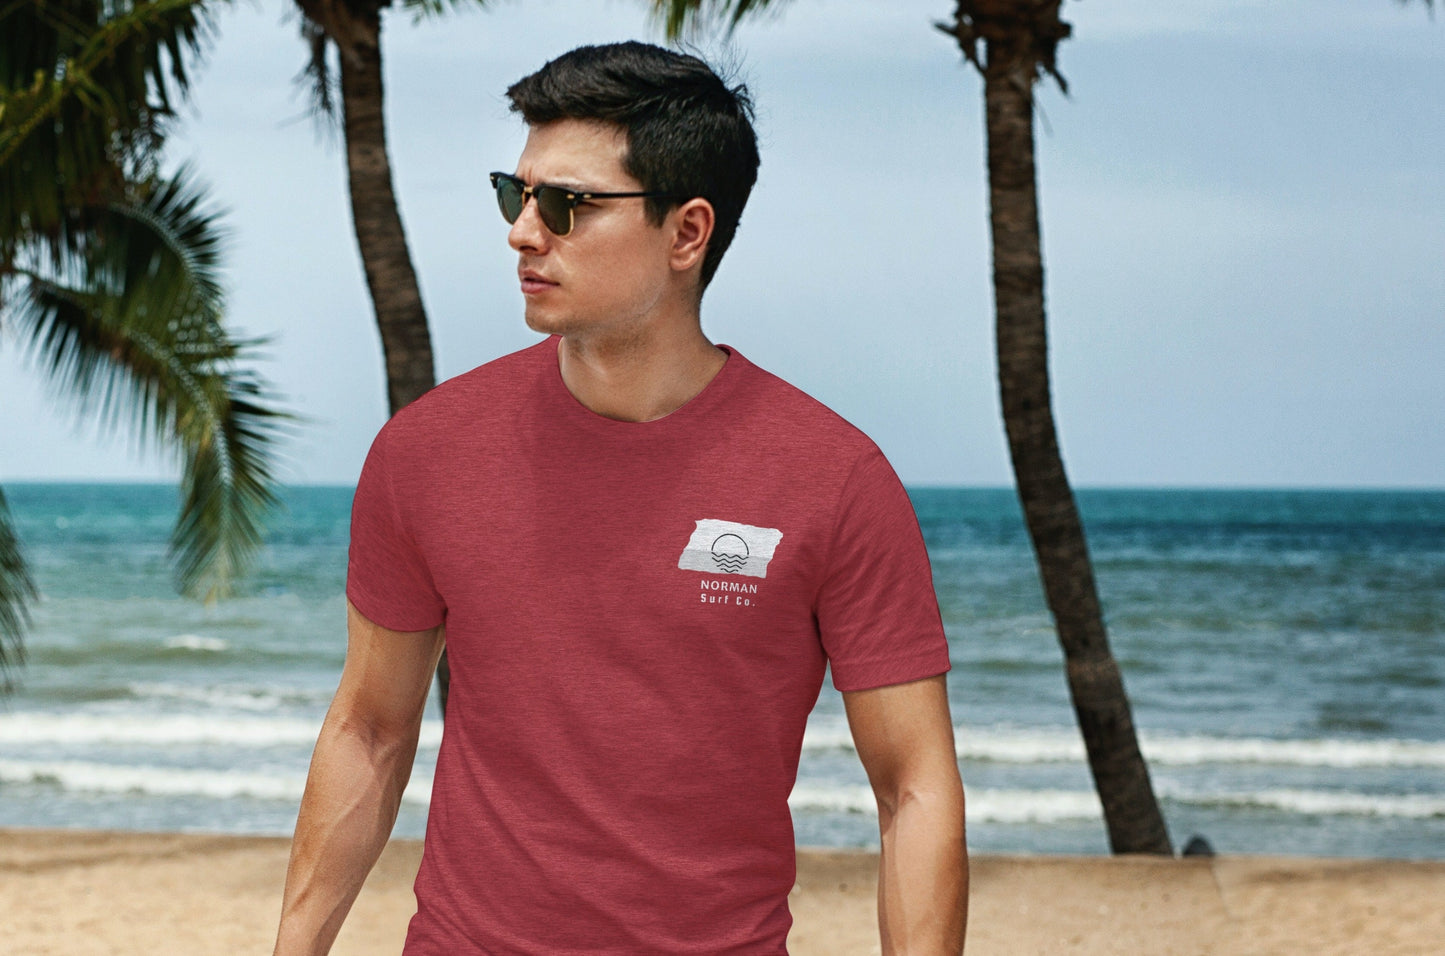 Norman Surf Co. Red Surfboard Shirt